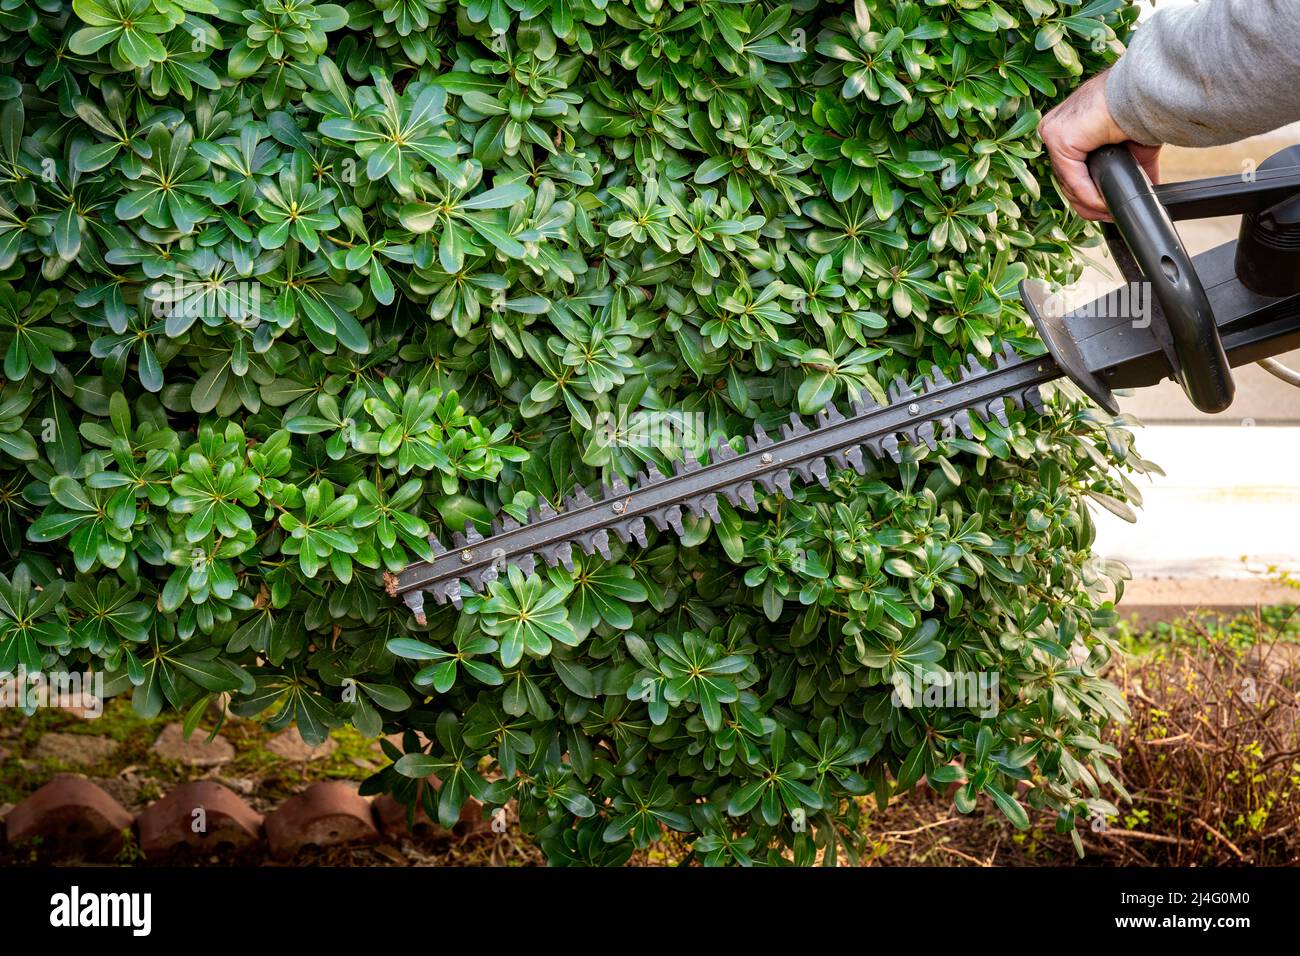 Gardener pruning hedge bush with electric mower in the garden. Spring, gardening, landscape design, agriculture concept. Stock Photo